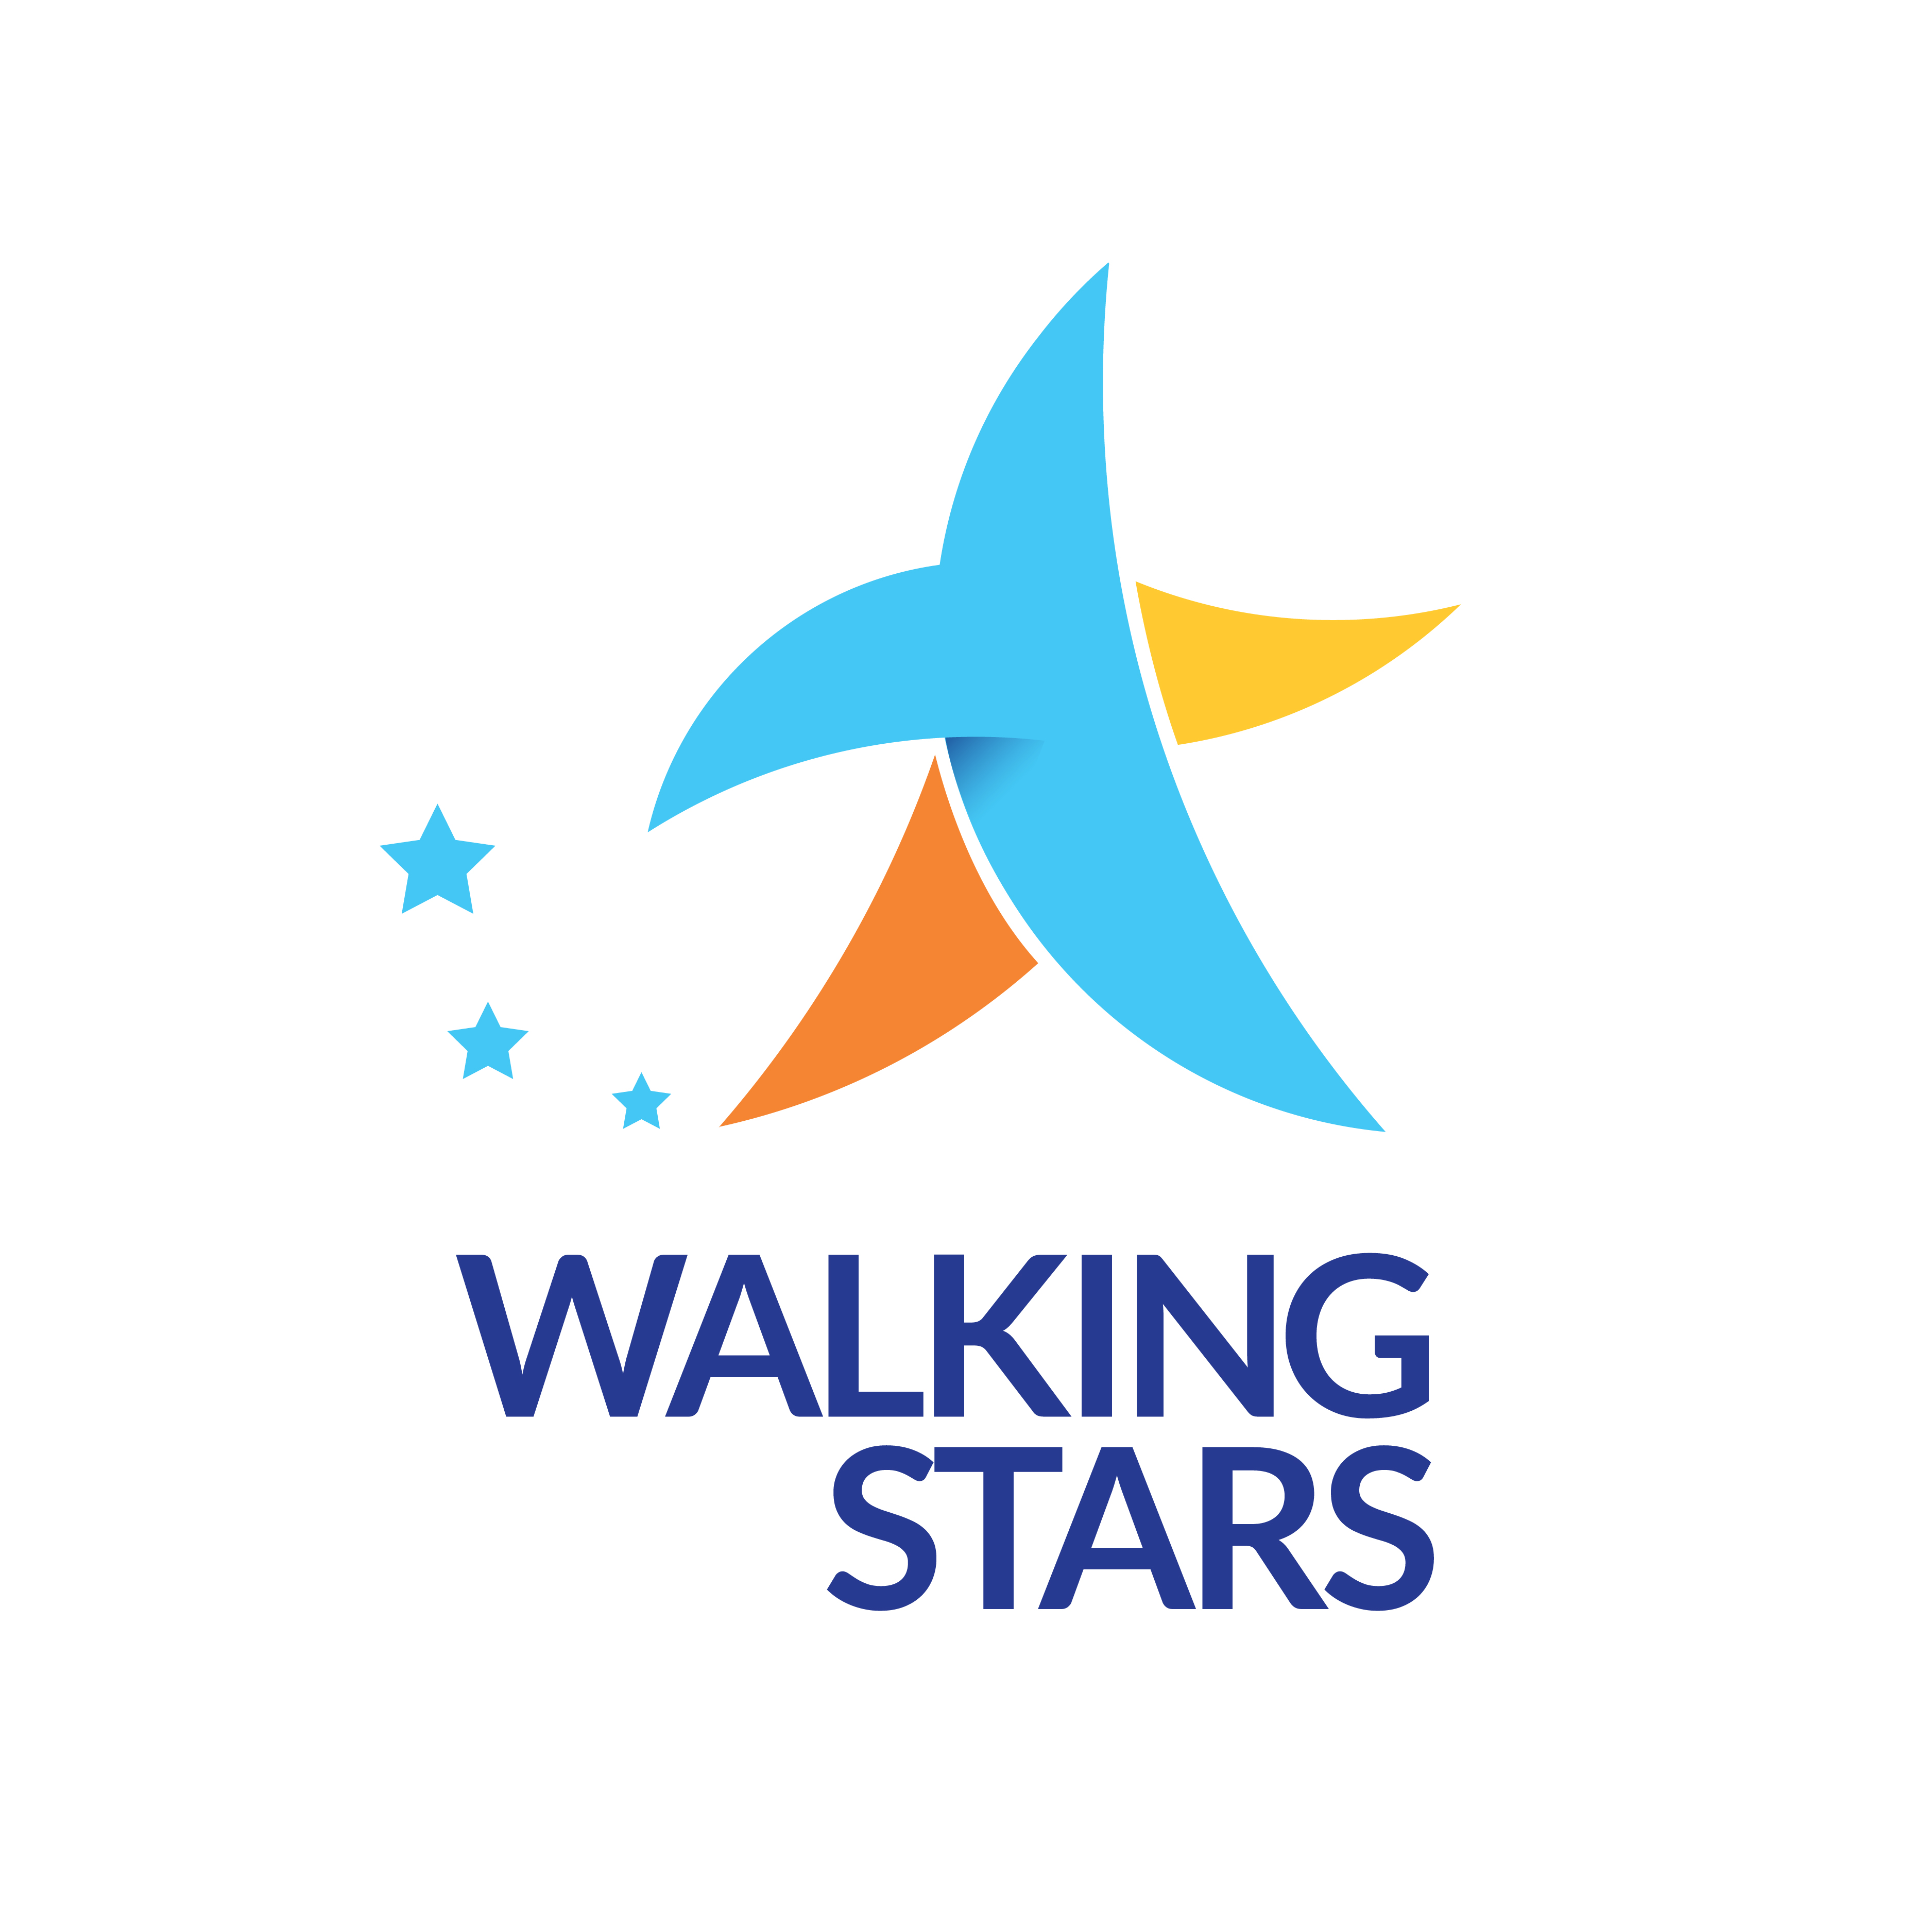 Walking Stars logo design by logo designer thoughtfields for your inspiration and for the worlds largest logo competition